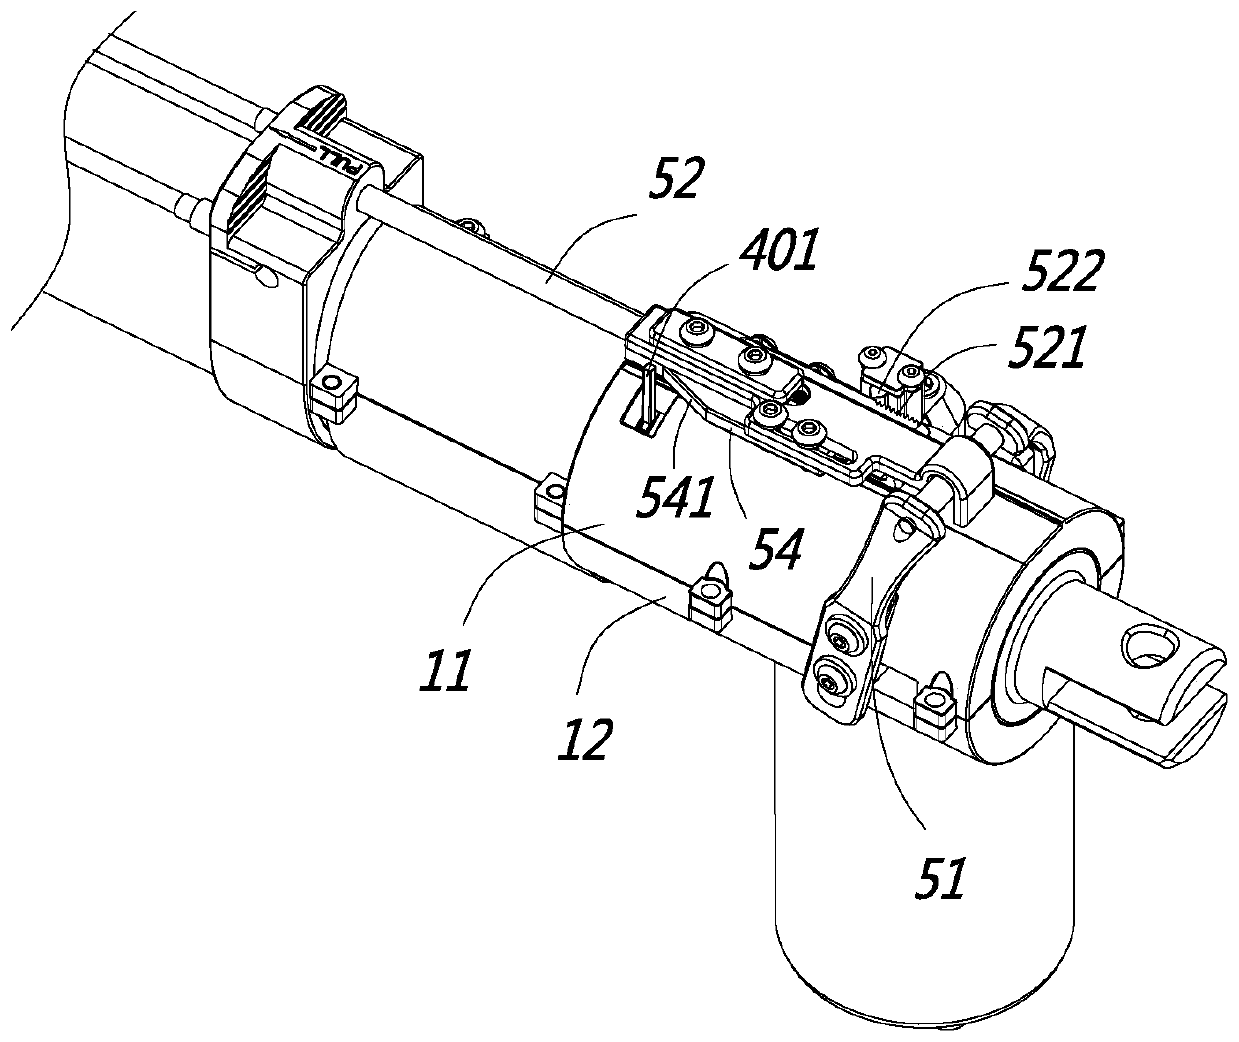 Linear actuator convenient to operate